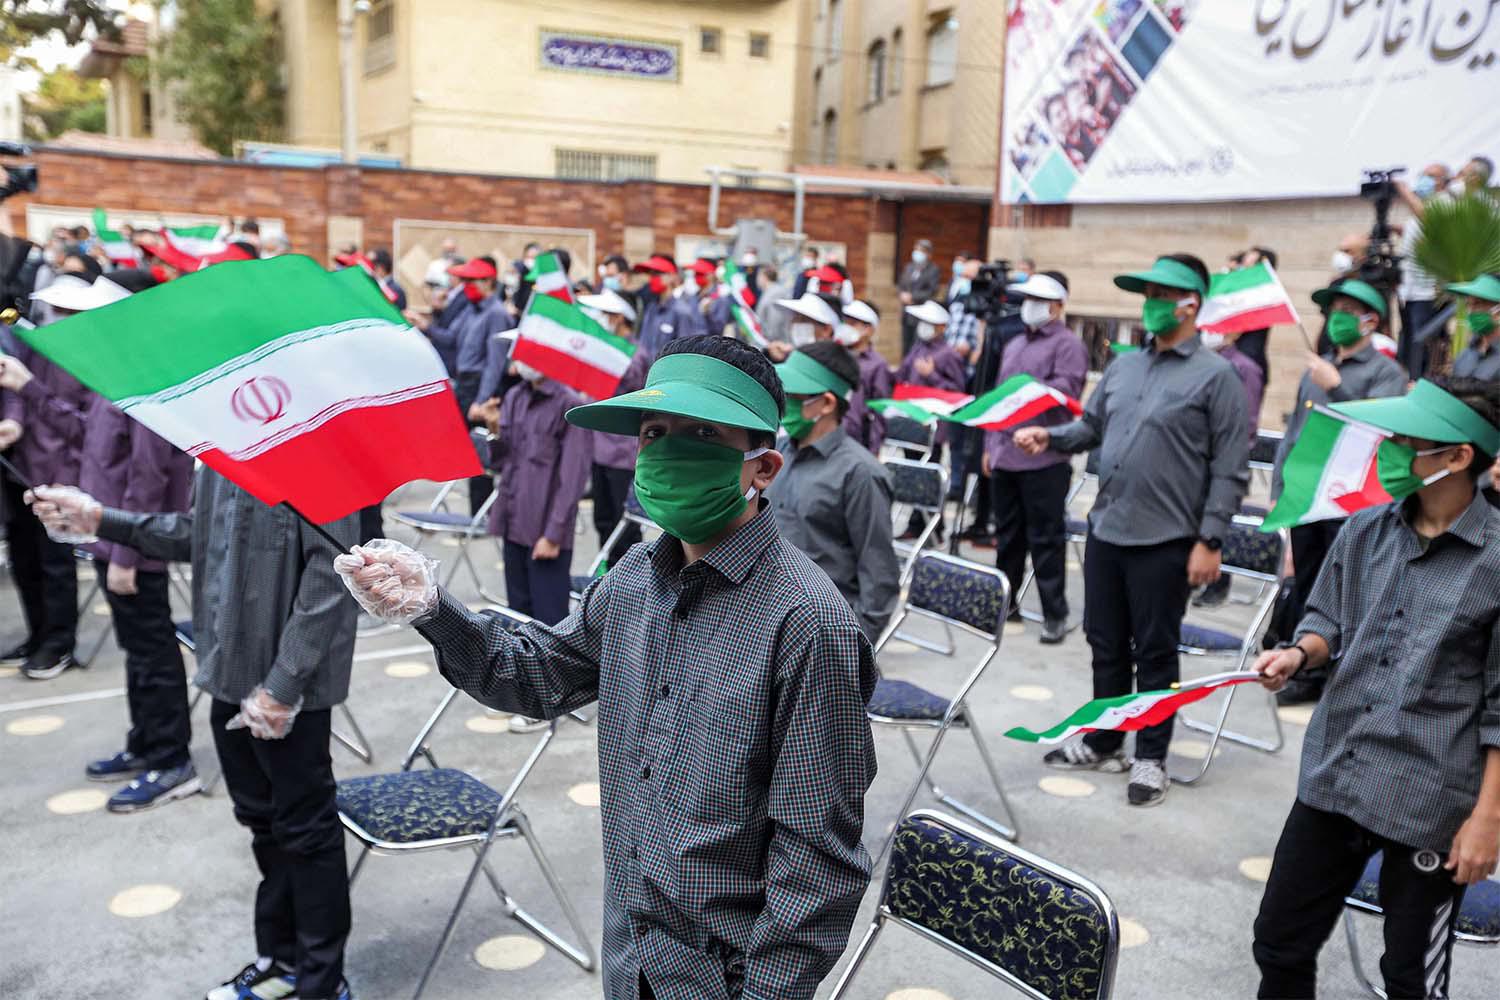 Iran's forensic organization has announced that 7% of the suicides in the country are children and adolescents